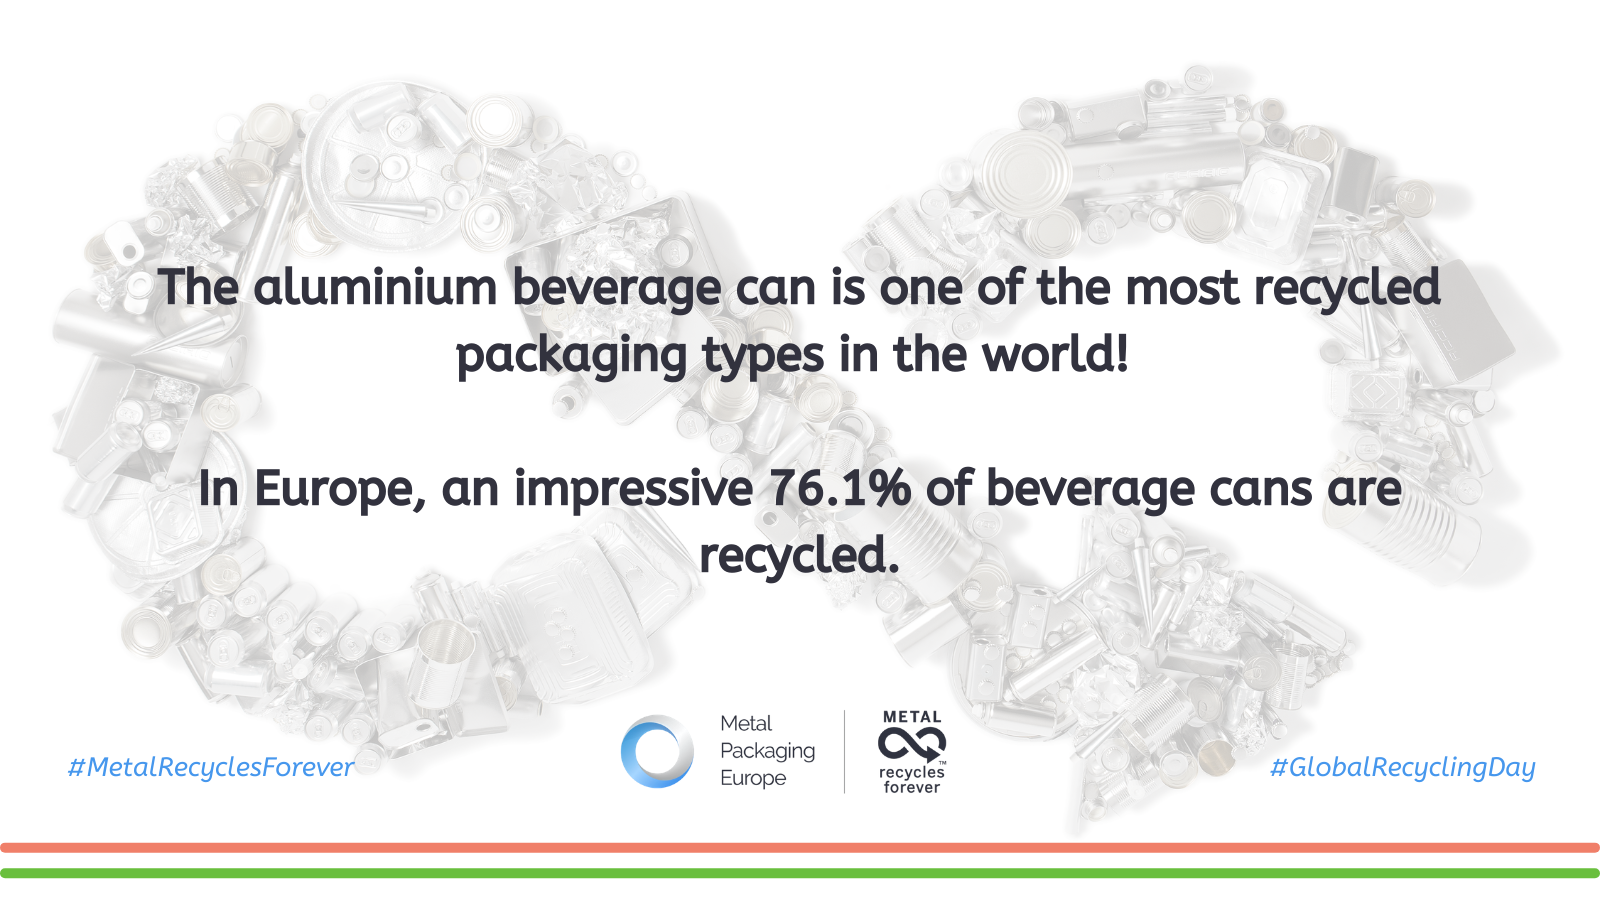 Aluminium beverage can recycling rates